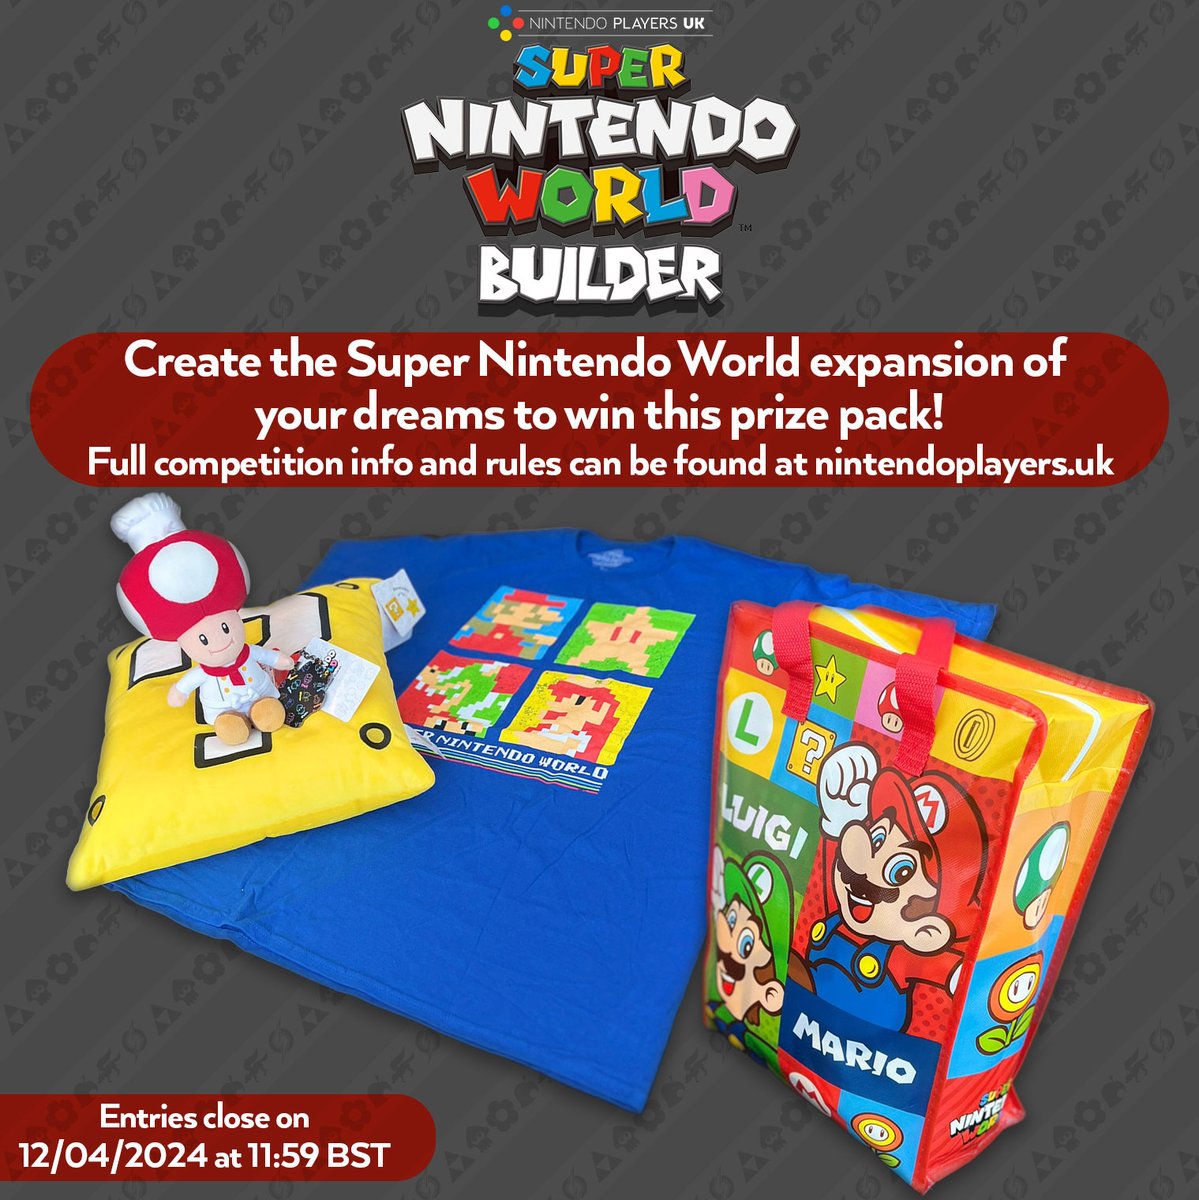 🎢🍄Create the #SuperNintendoWorld expansion of your dreams and you could win a goodie bag full of exclusive merch from @UniStudios! 🔗Full competition details here - loom.ly/wiGRKLA